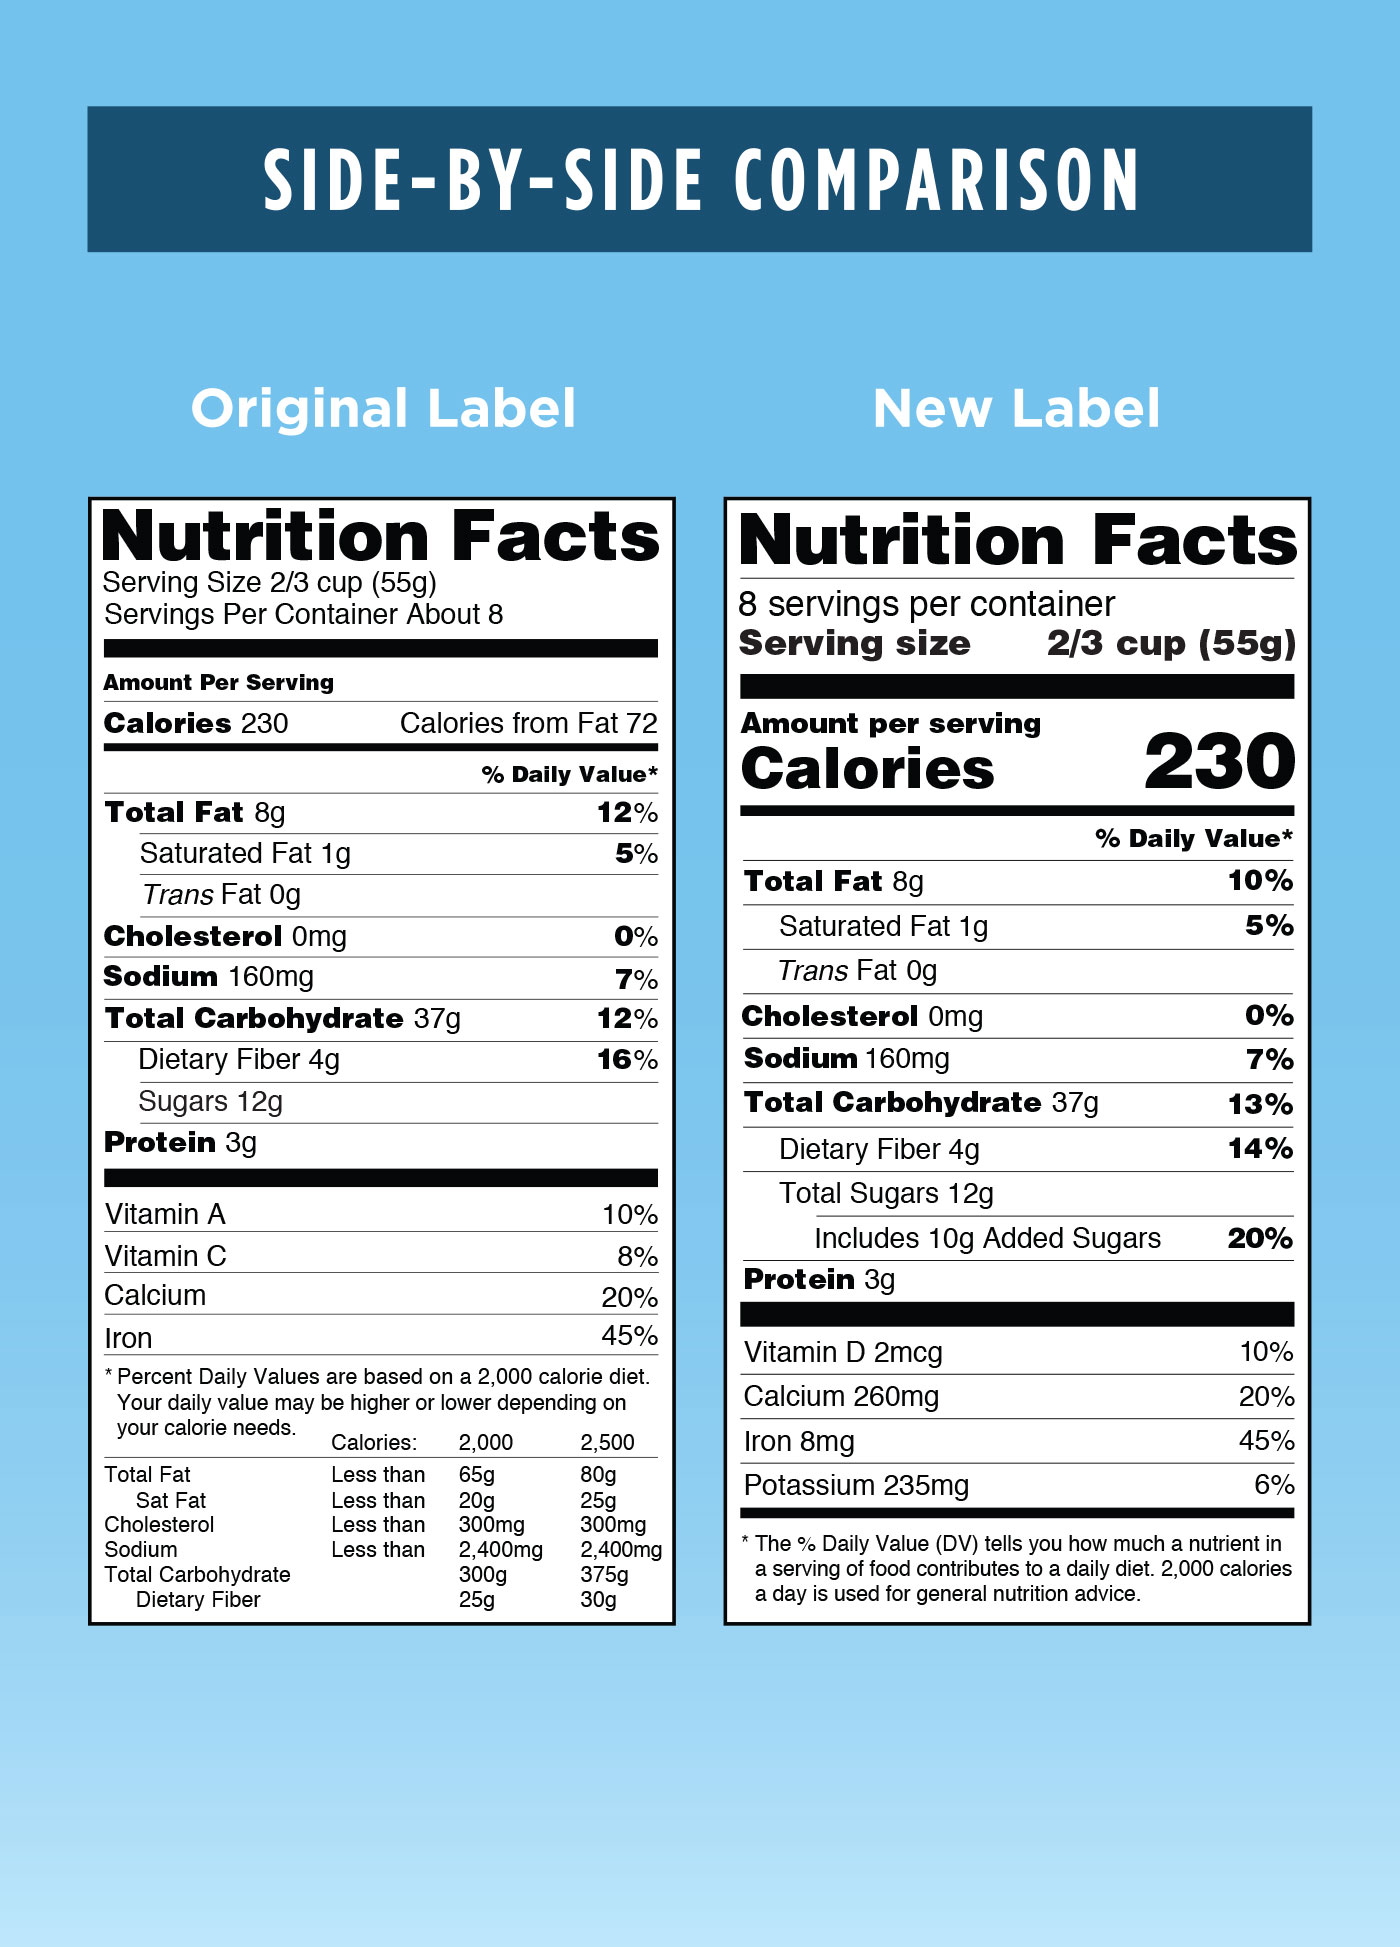 image comparing old Nutrition Facts label to new label